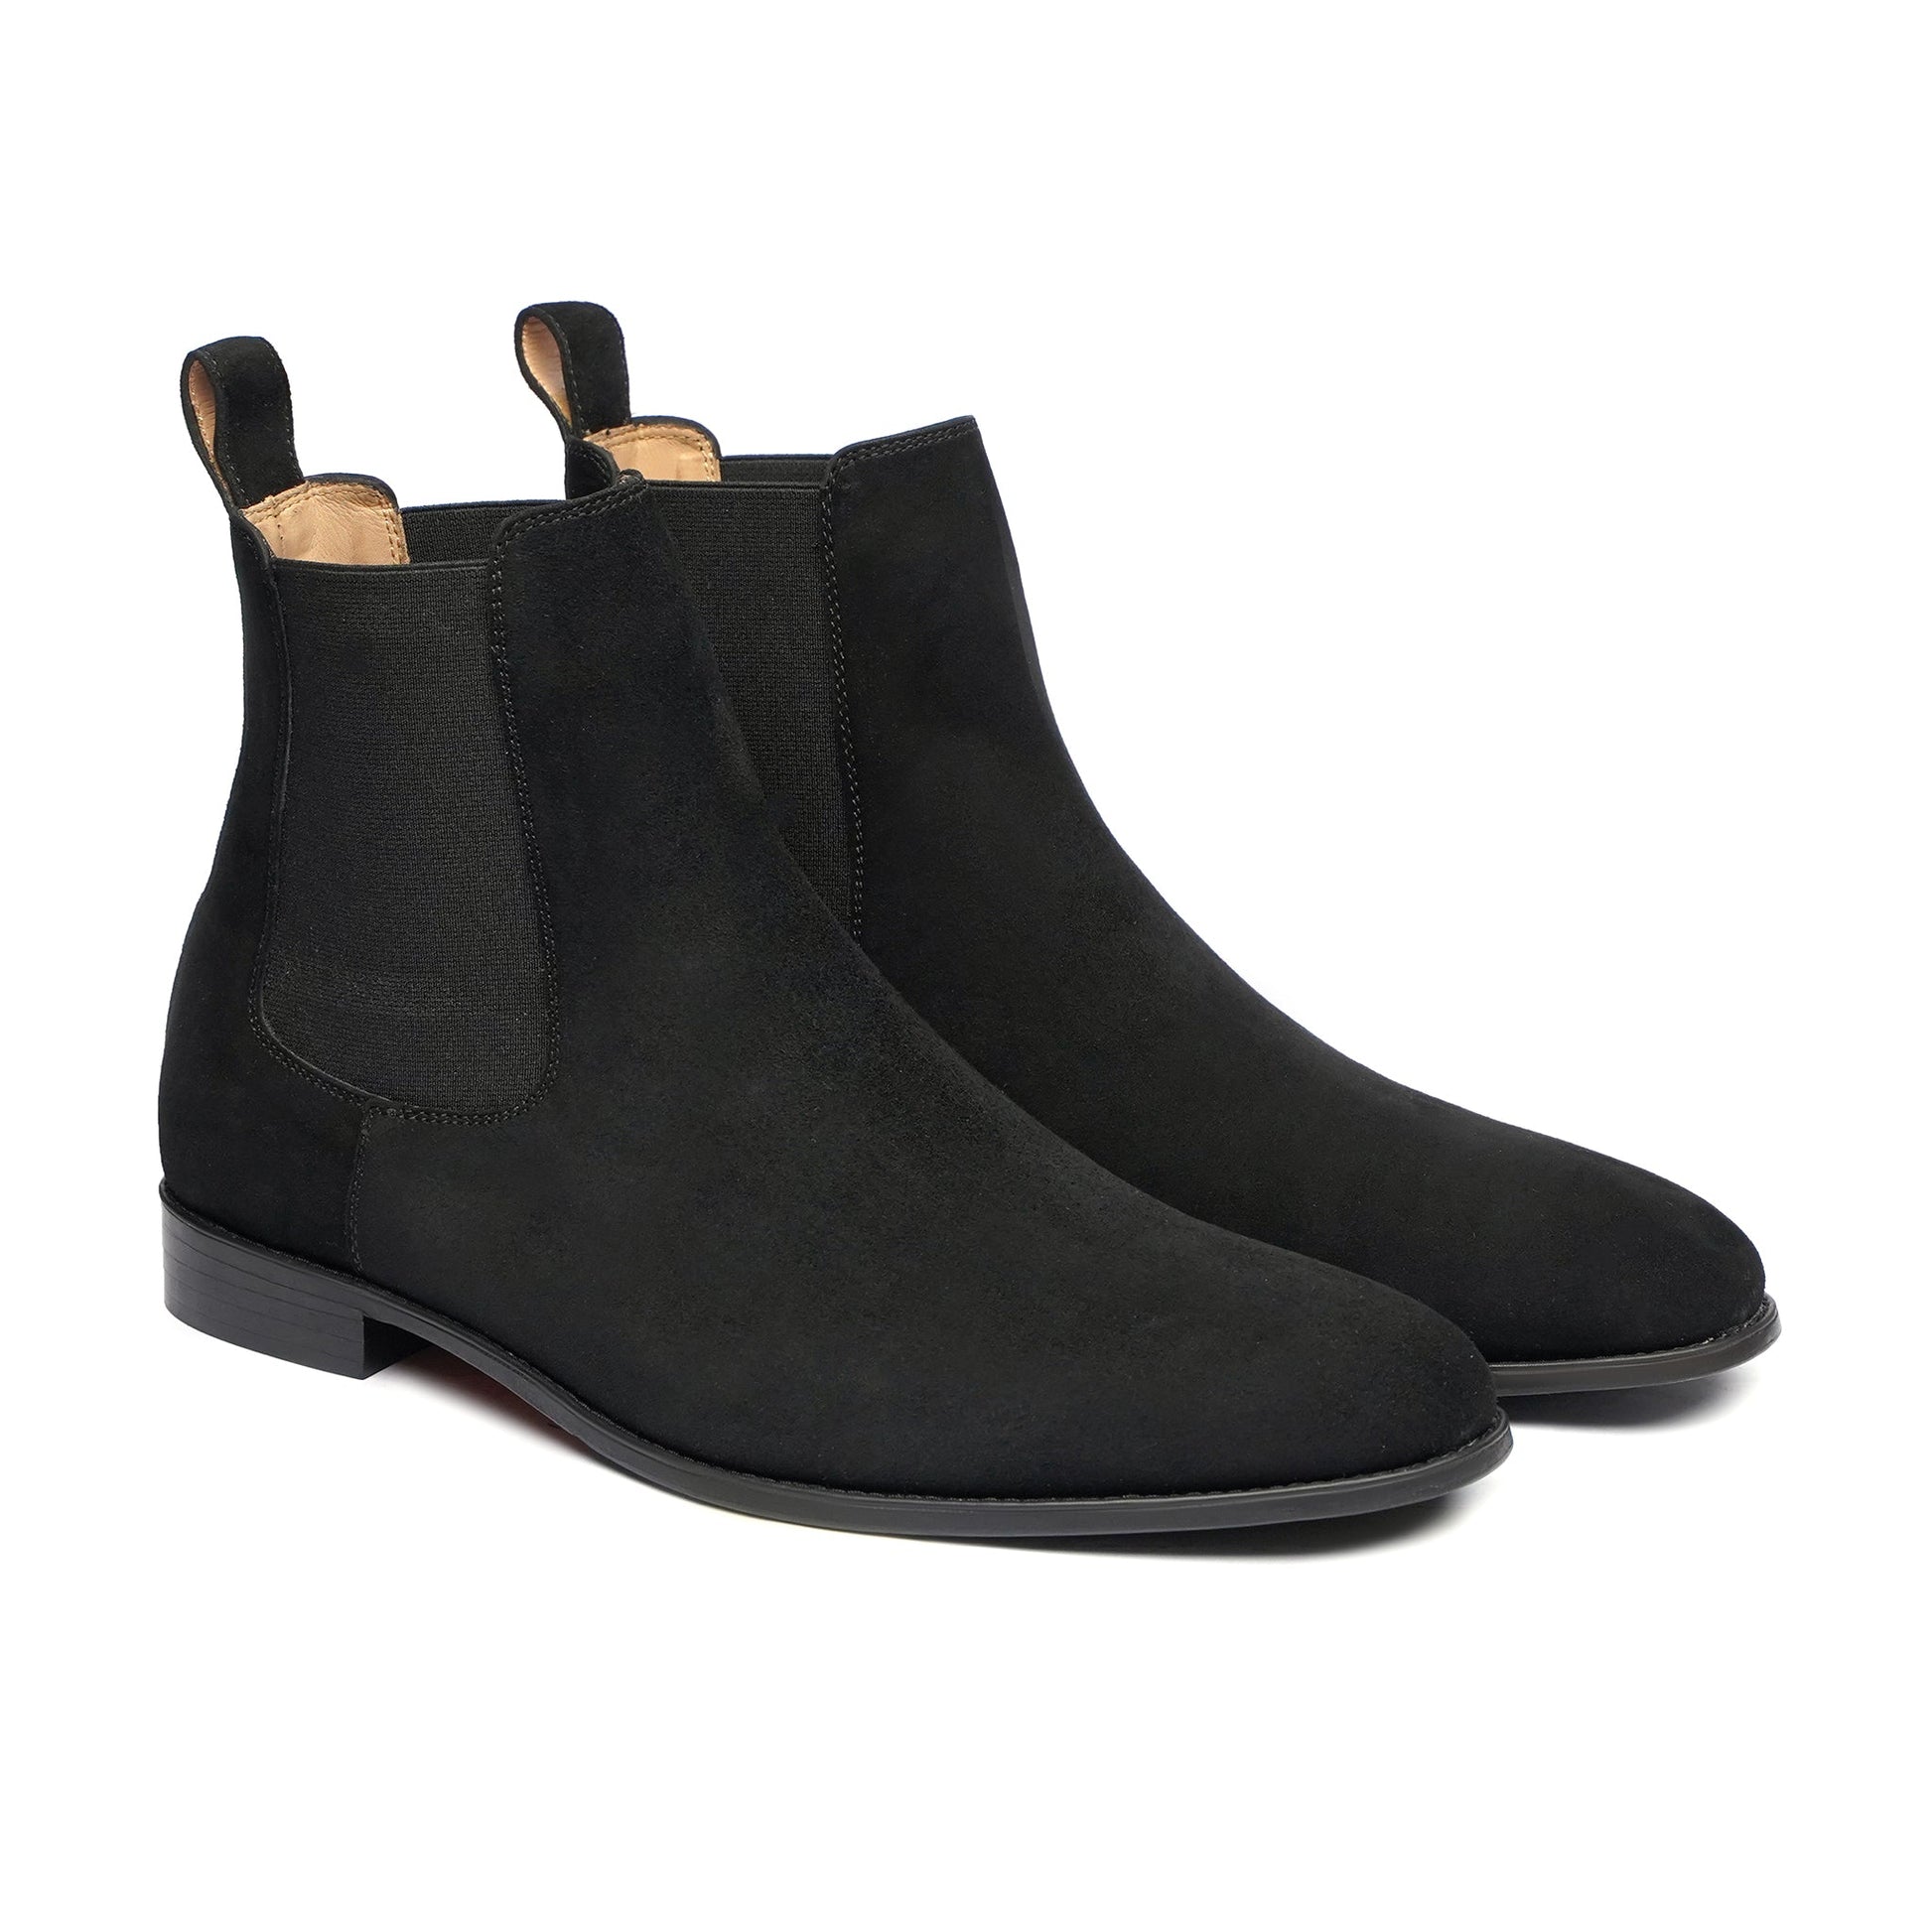 Black Suede Chelsea Leather Boots